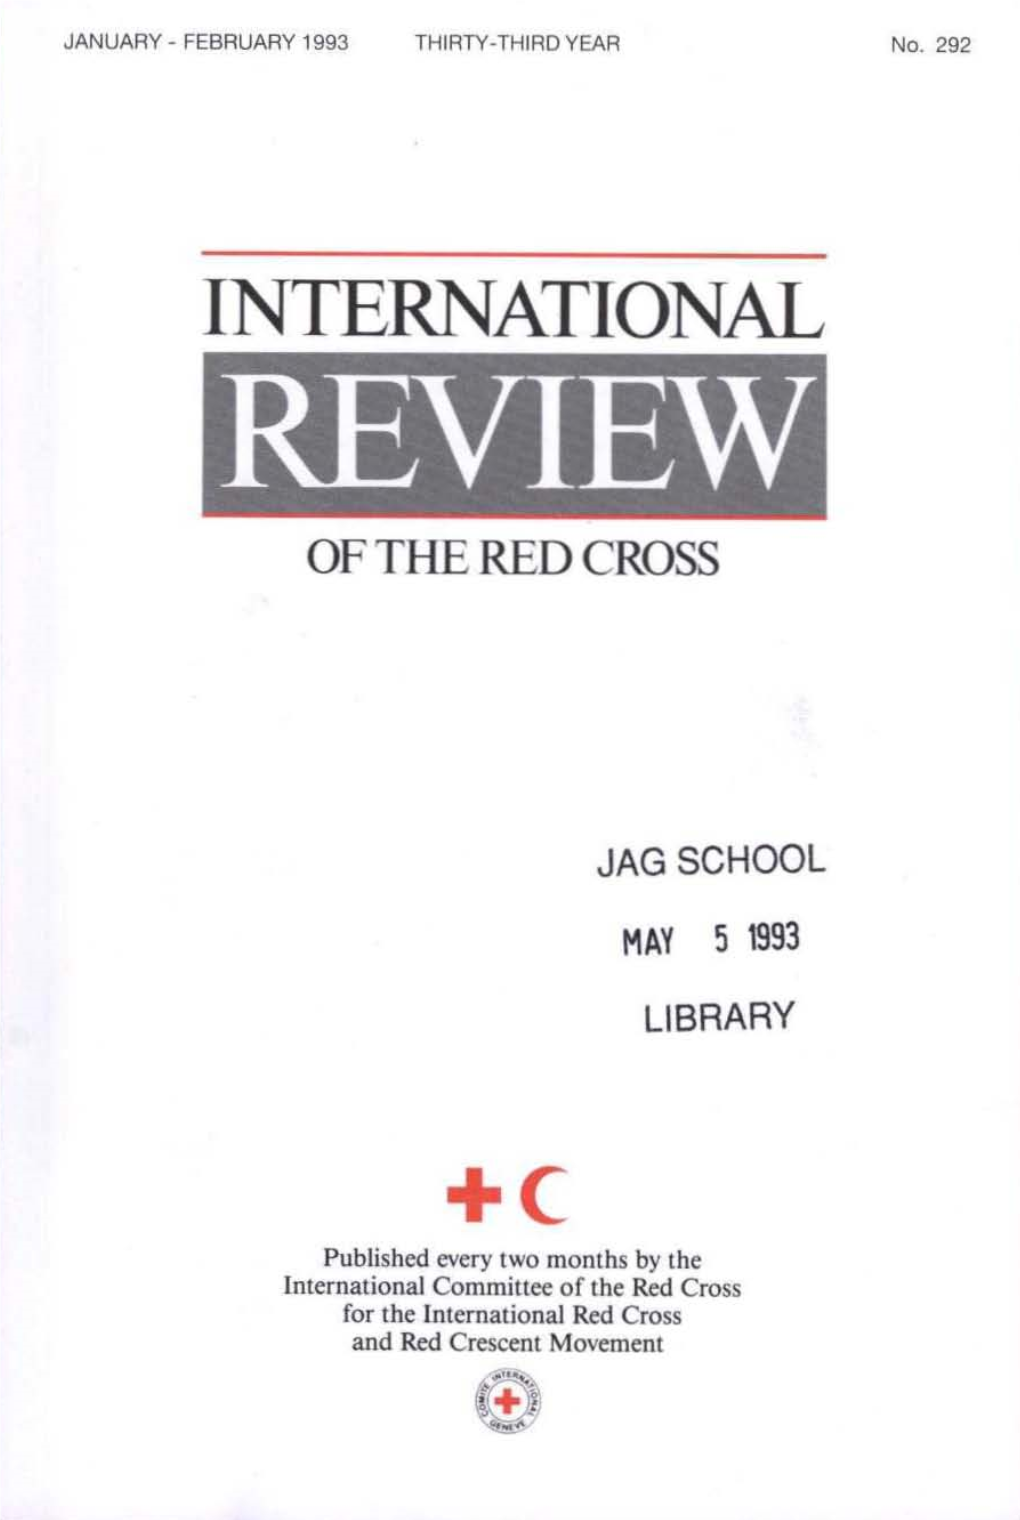 International Review of the Red Cross, January-February 1993